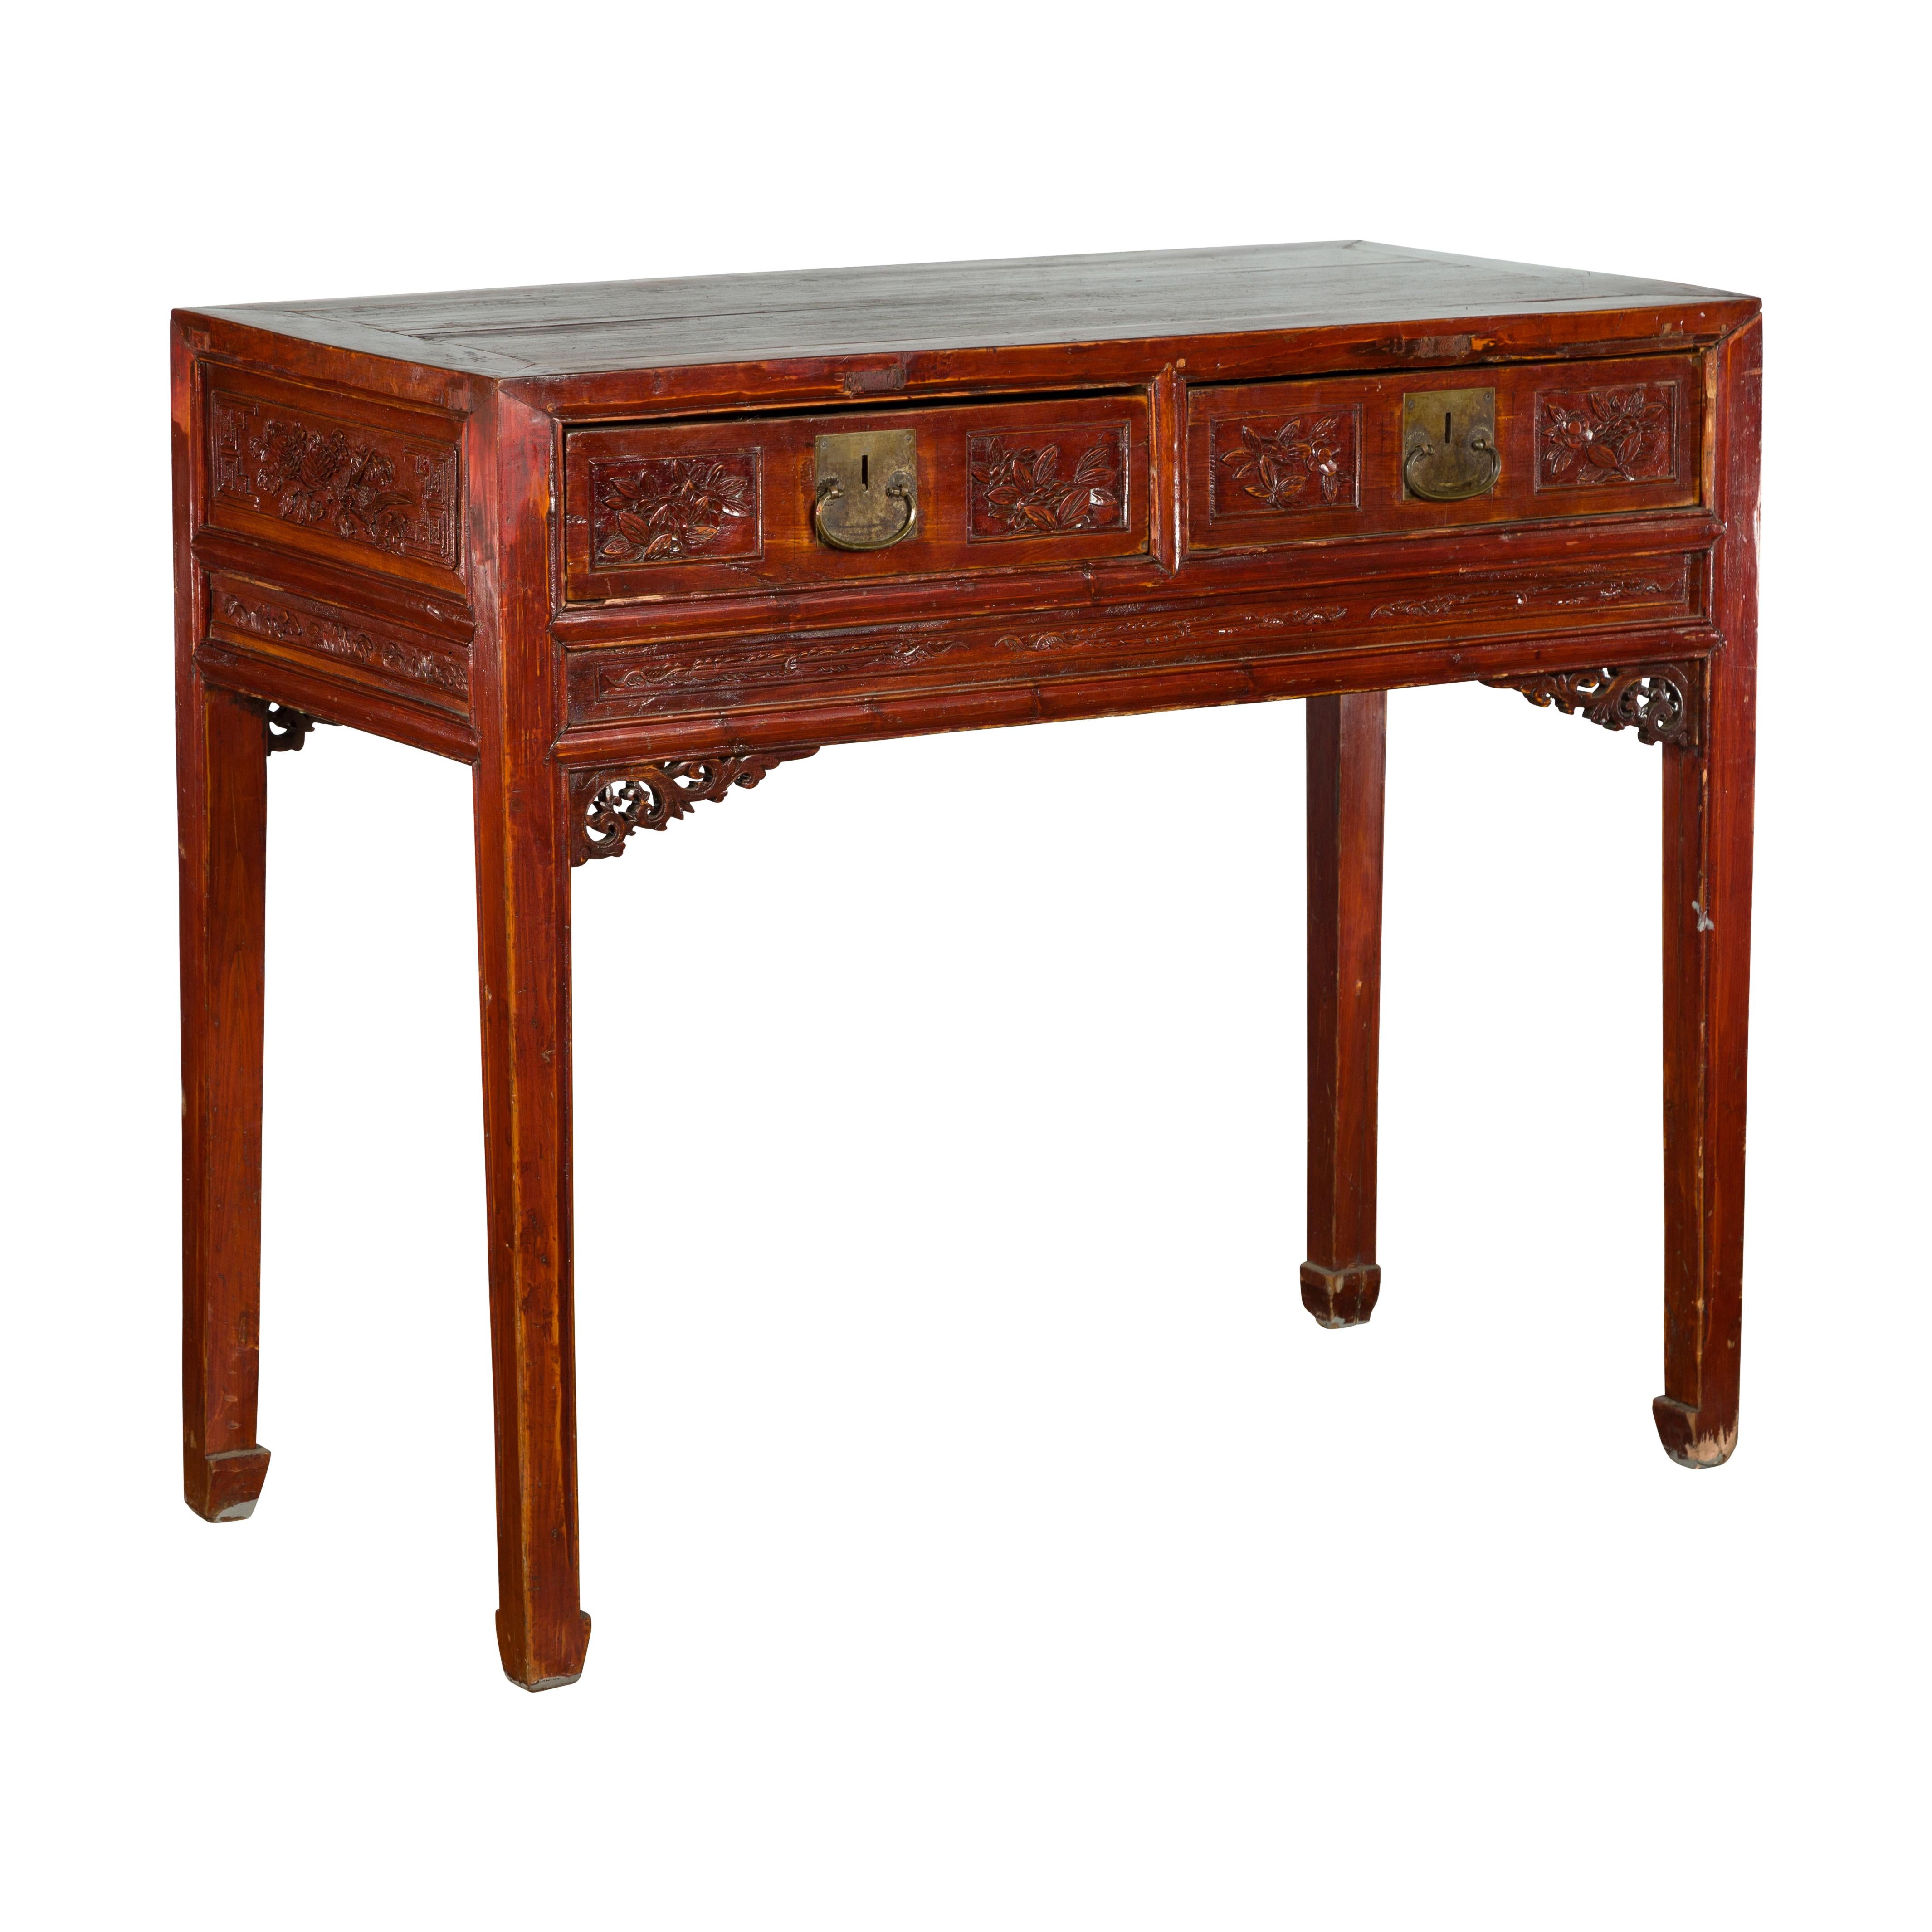 An antique Chinese Qing Dynasty period two-drawer console table from the 19th century, with carved spandrels and floral motifs. Created in China during the Qing Dynasty period, this reddish brown lacquered table features a rectangular planked top